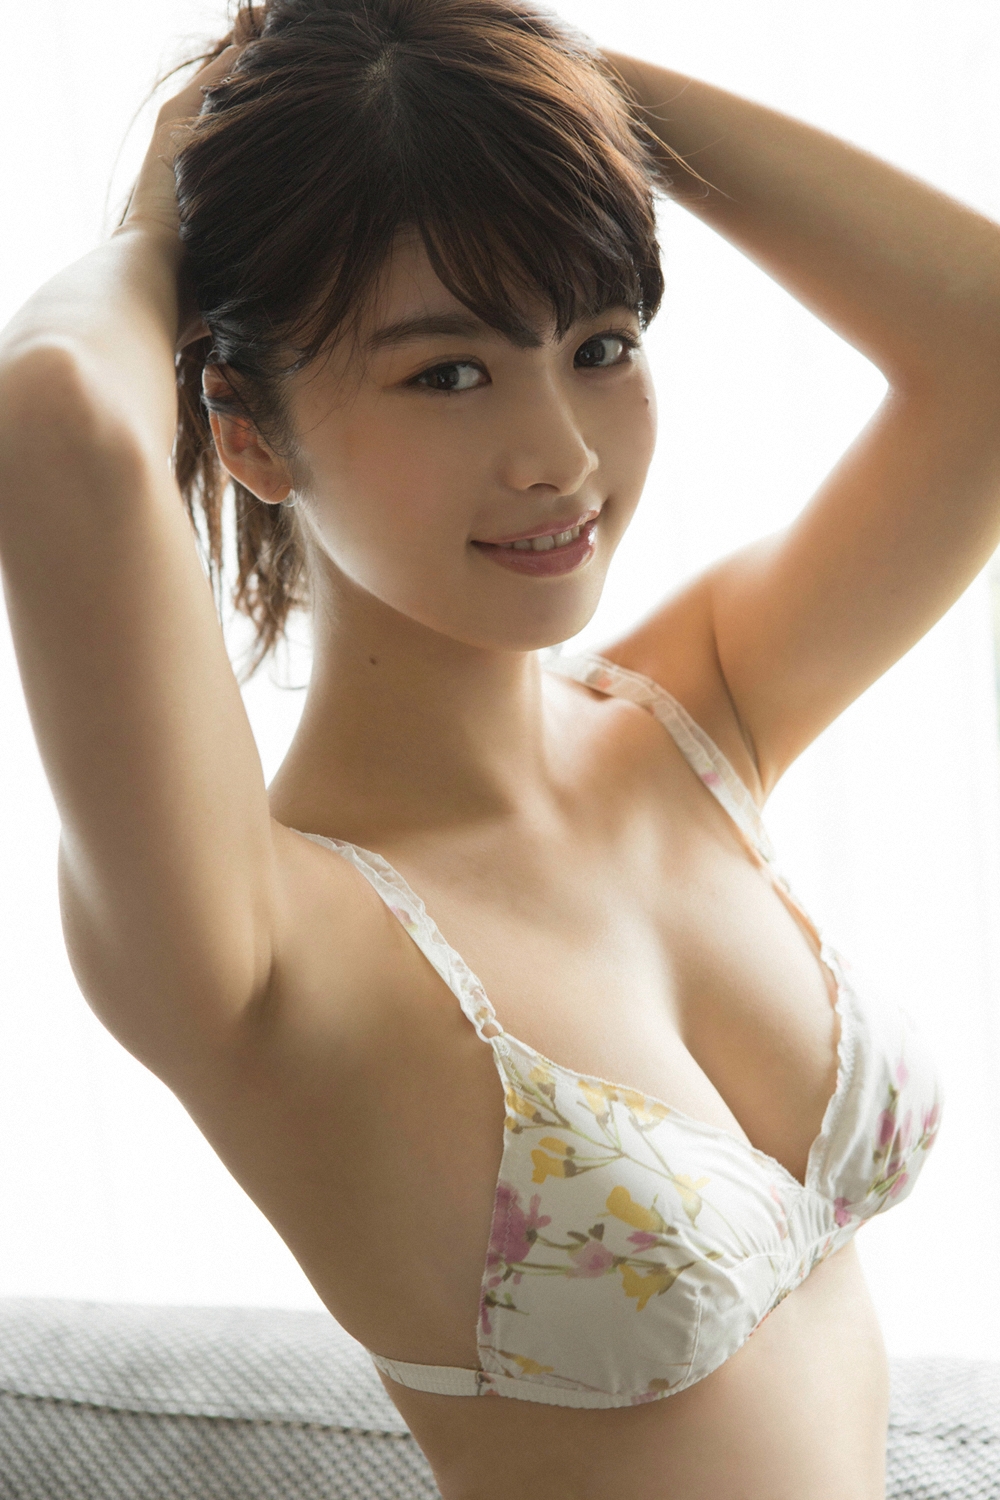 Japanese-model-and-actress-Fumika-Baba-www.ohfree.net-025 Japanese model and actress Fumika Baba 馬場 ふみか nude photos leaked 